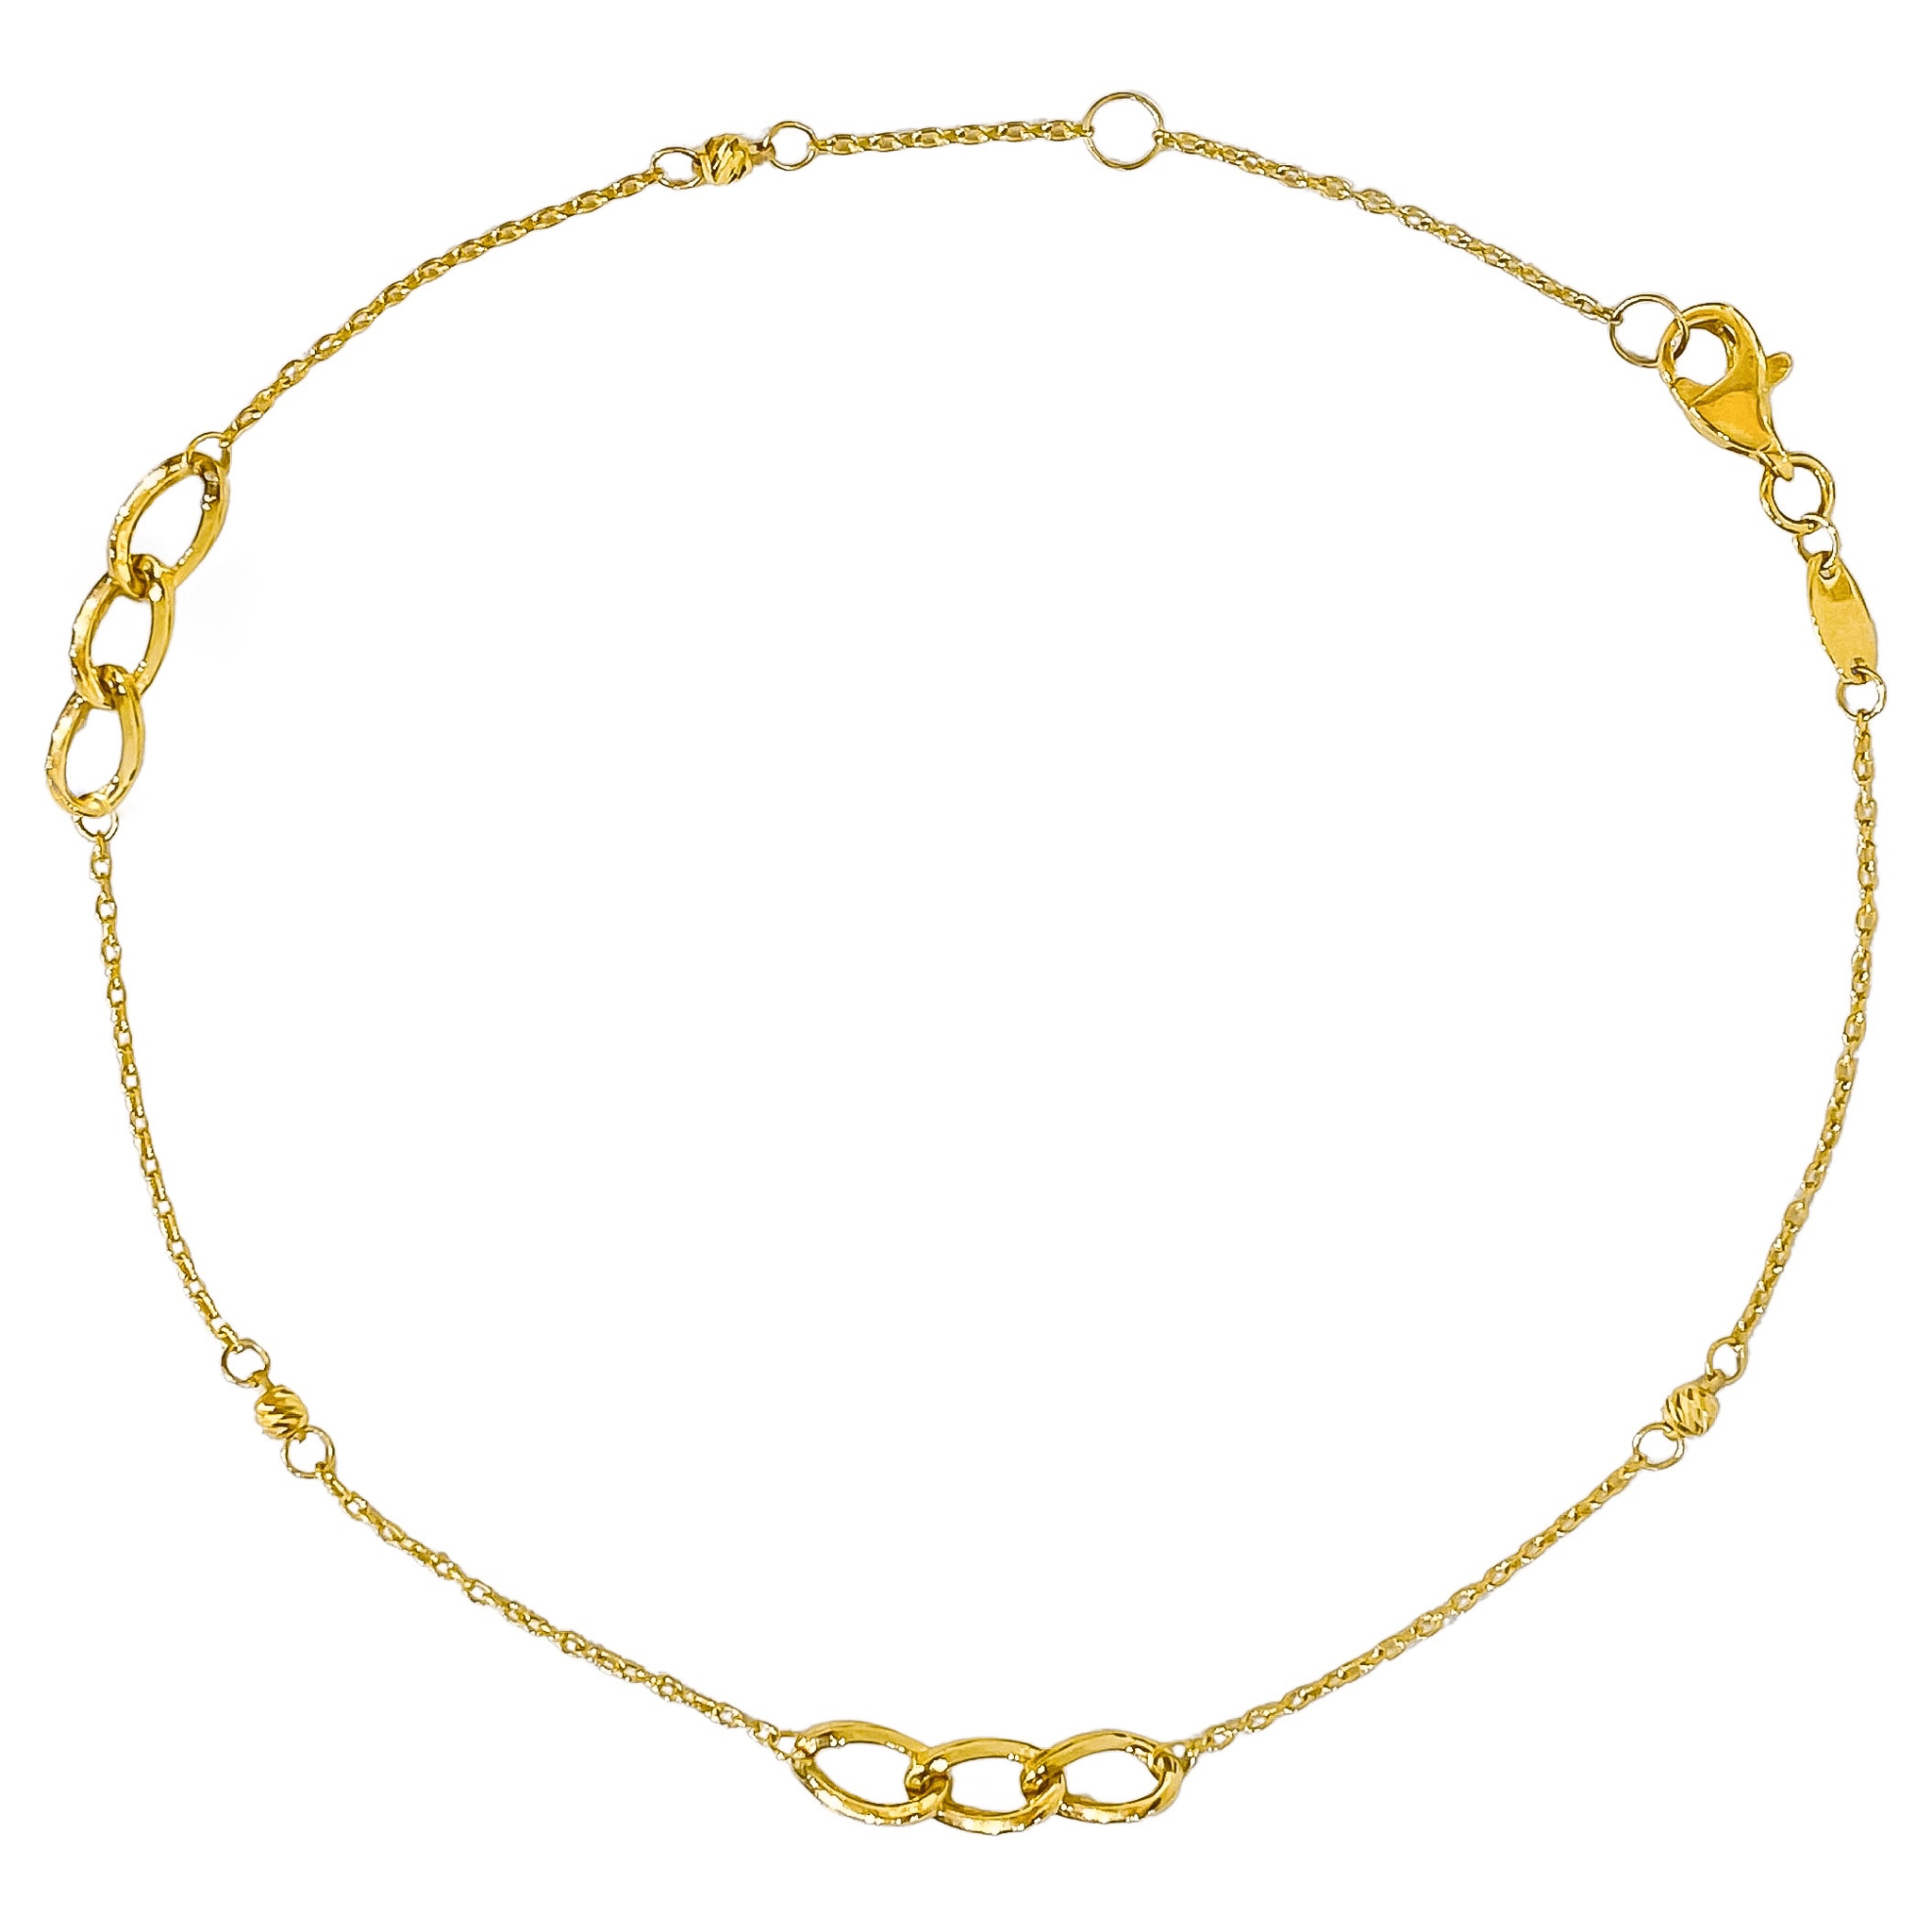 10K YELLOW GOLD CUBAN LINK PIECES ANKLET